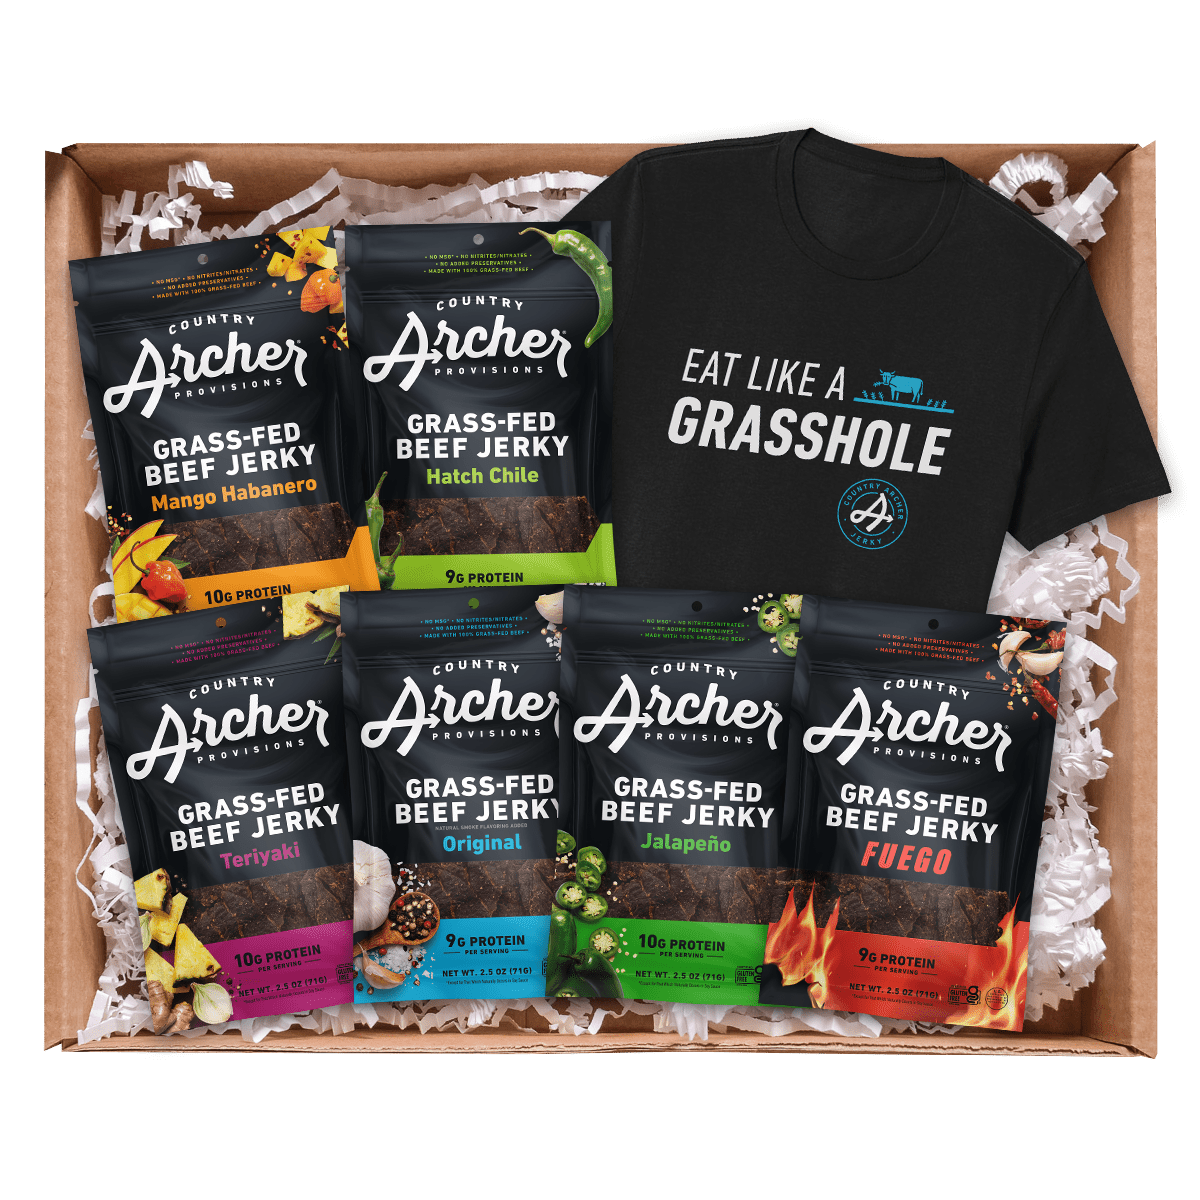  Grass-fed Beef Jerky Gift Pack by Country Archer, Grass-fed Beef Jerky Gift Pack, gifts - Grass Fed Beef, grass-fed-beef-jerky-gift-pack, , Pack with Small Unisex T-Shirt